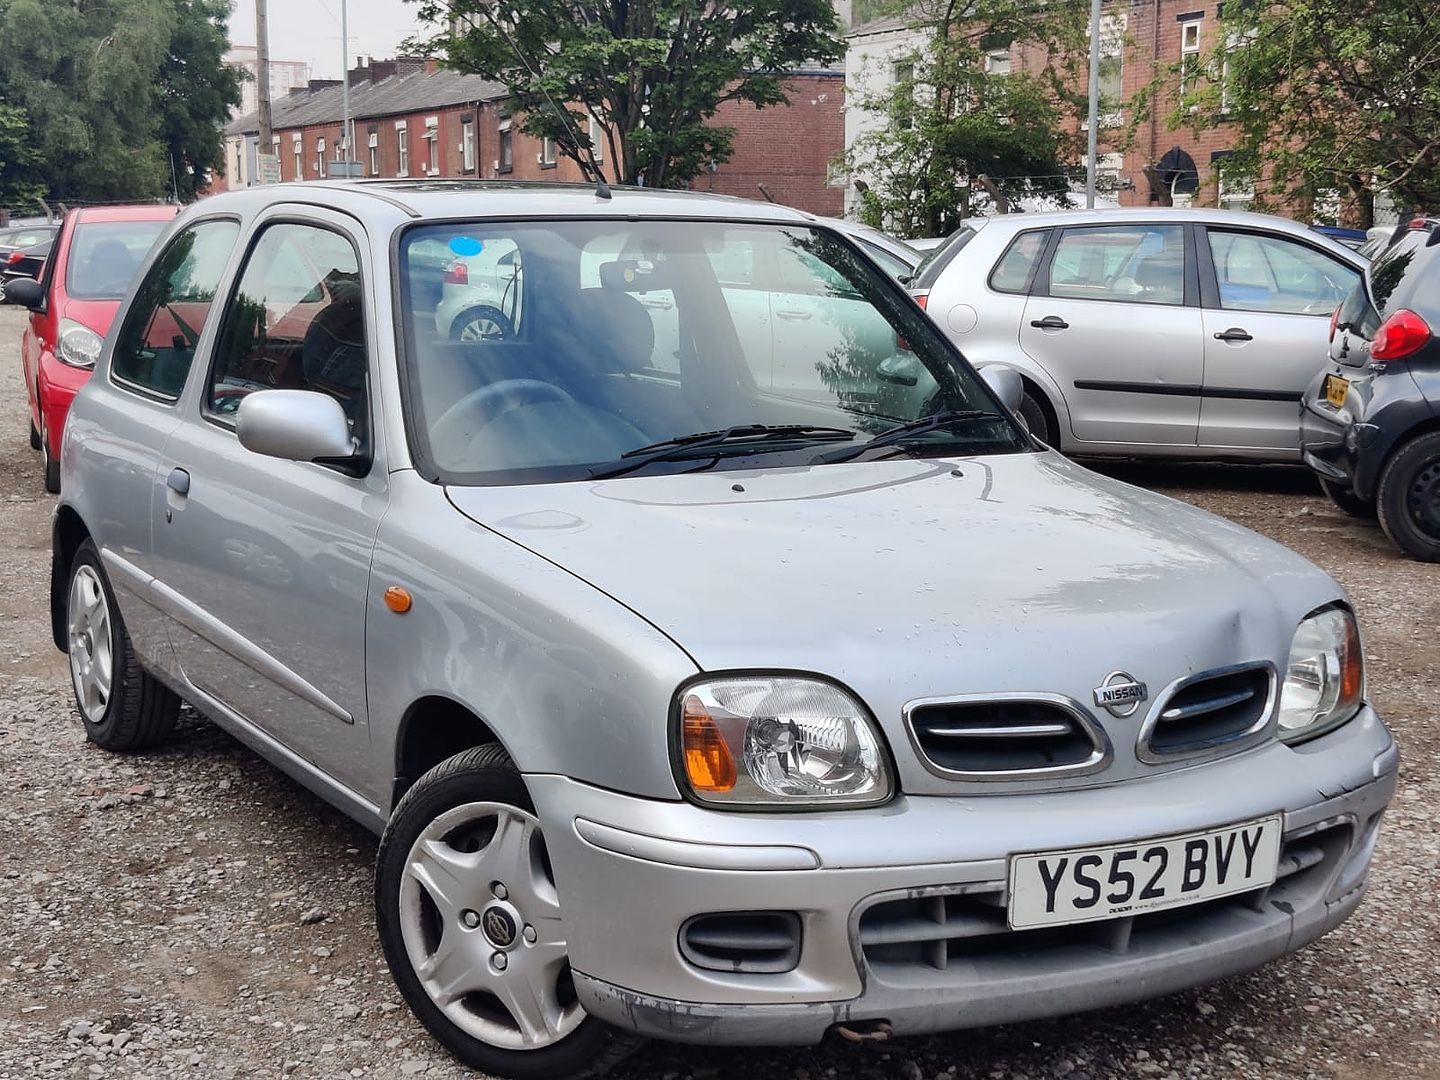 NISSANMicra1.0 Tempest for sale